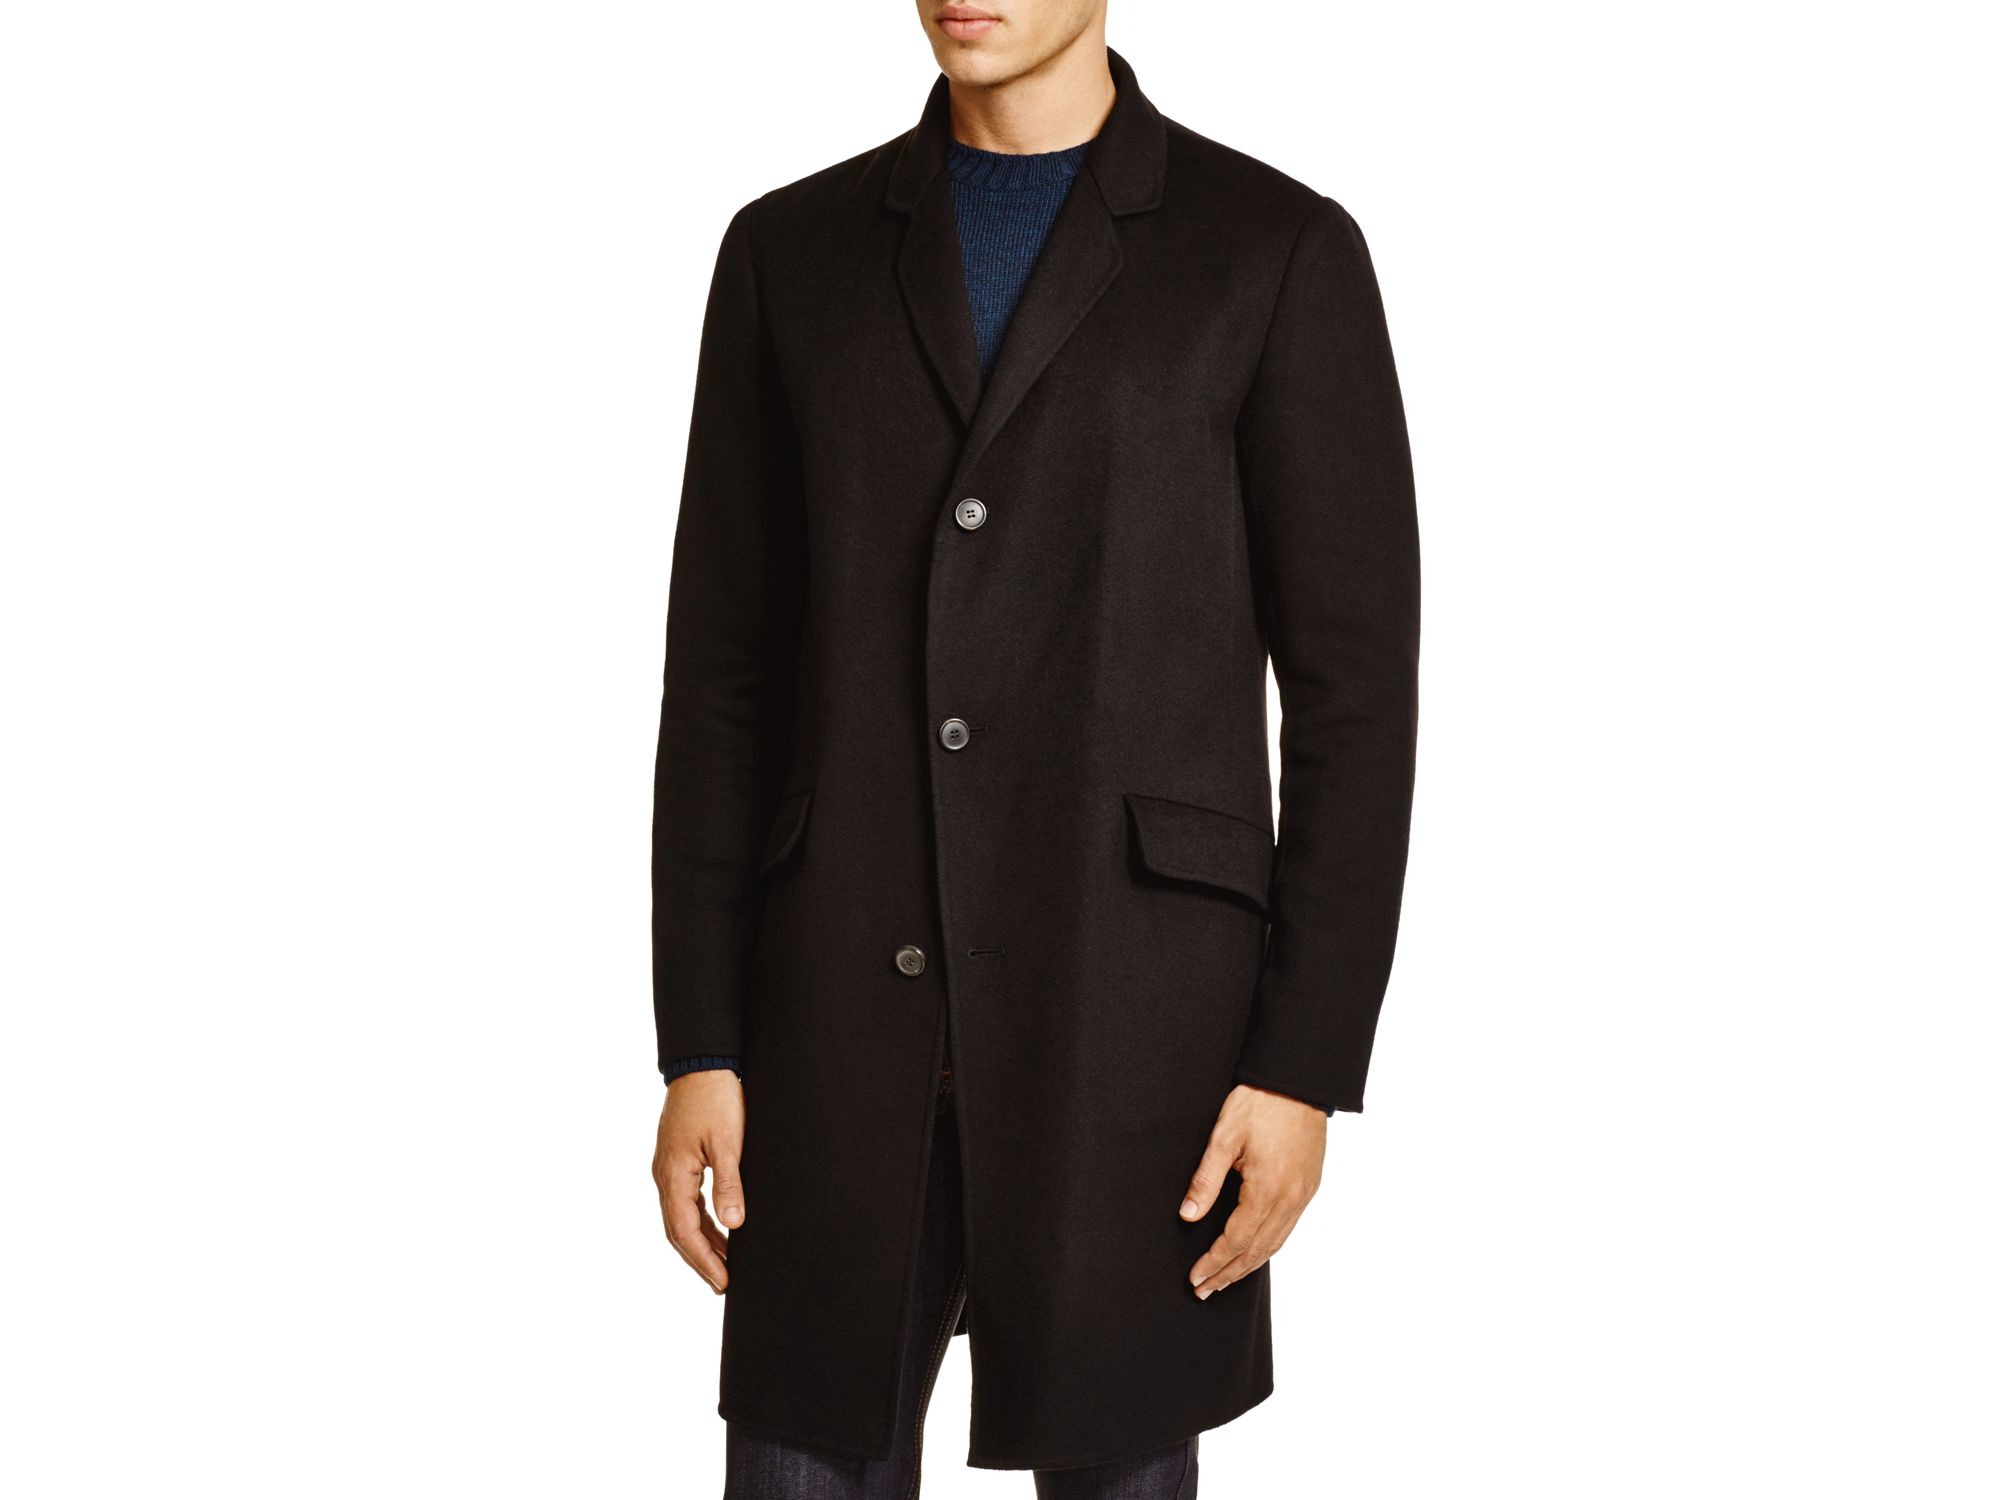 Lyst - Theory Whyte Wool-cashmere Coat in Black for Men